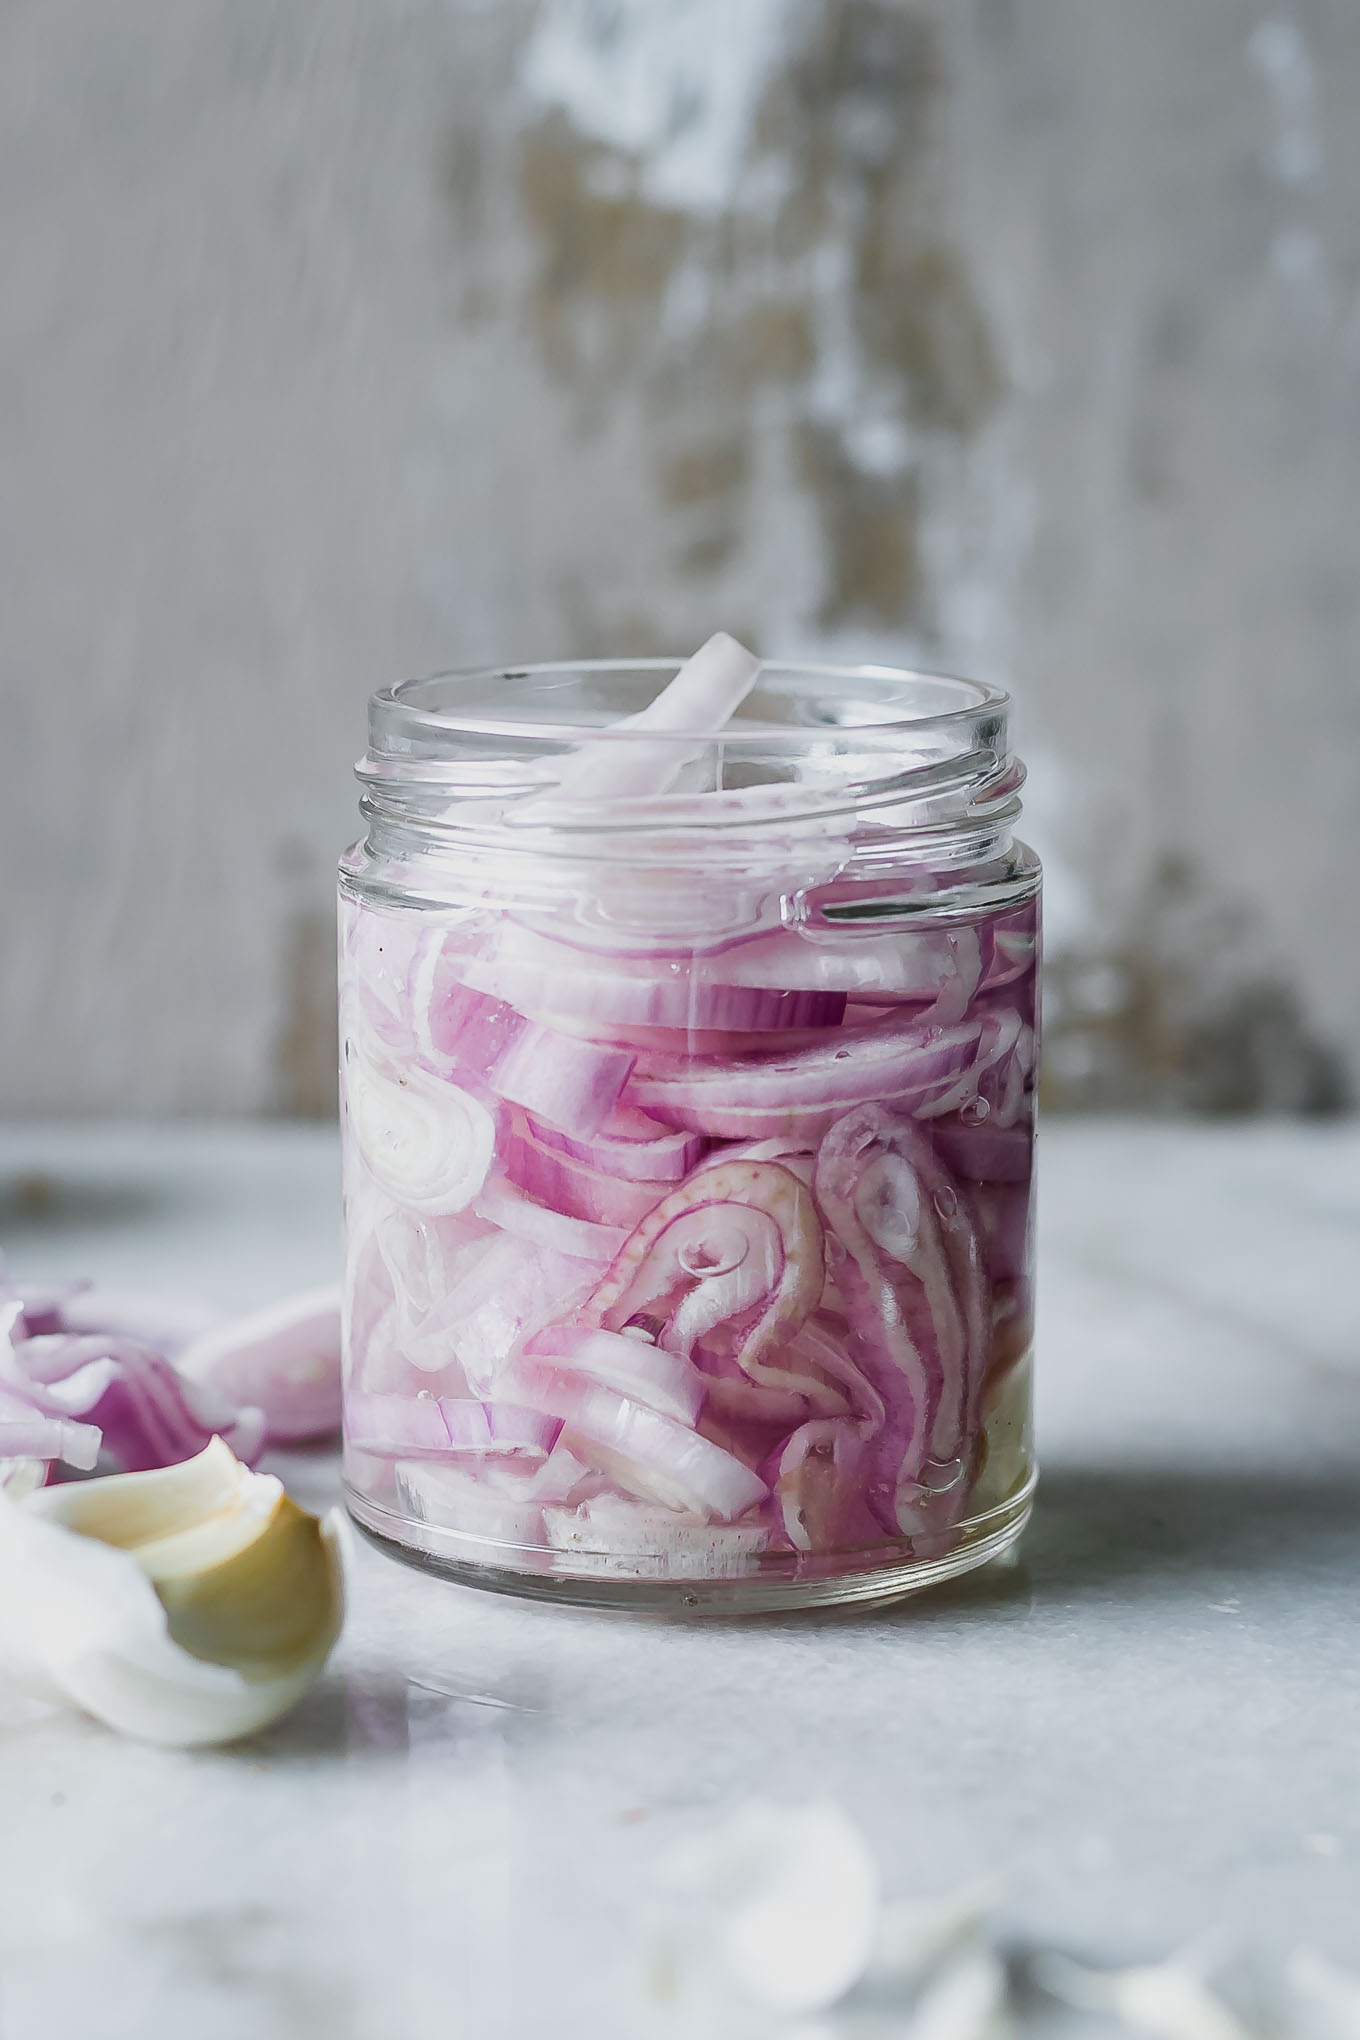 Quick Pickled Shallots